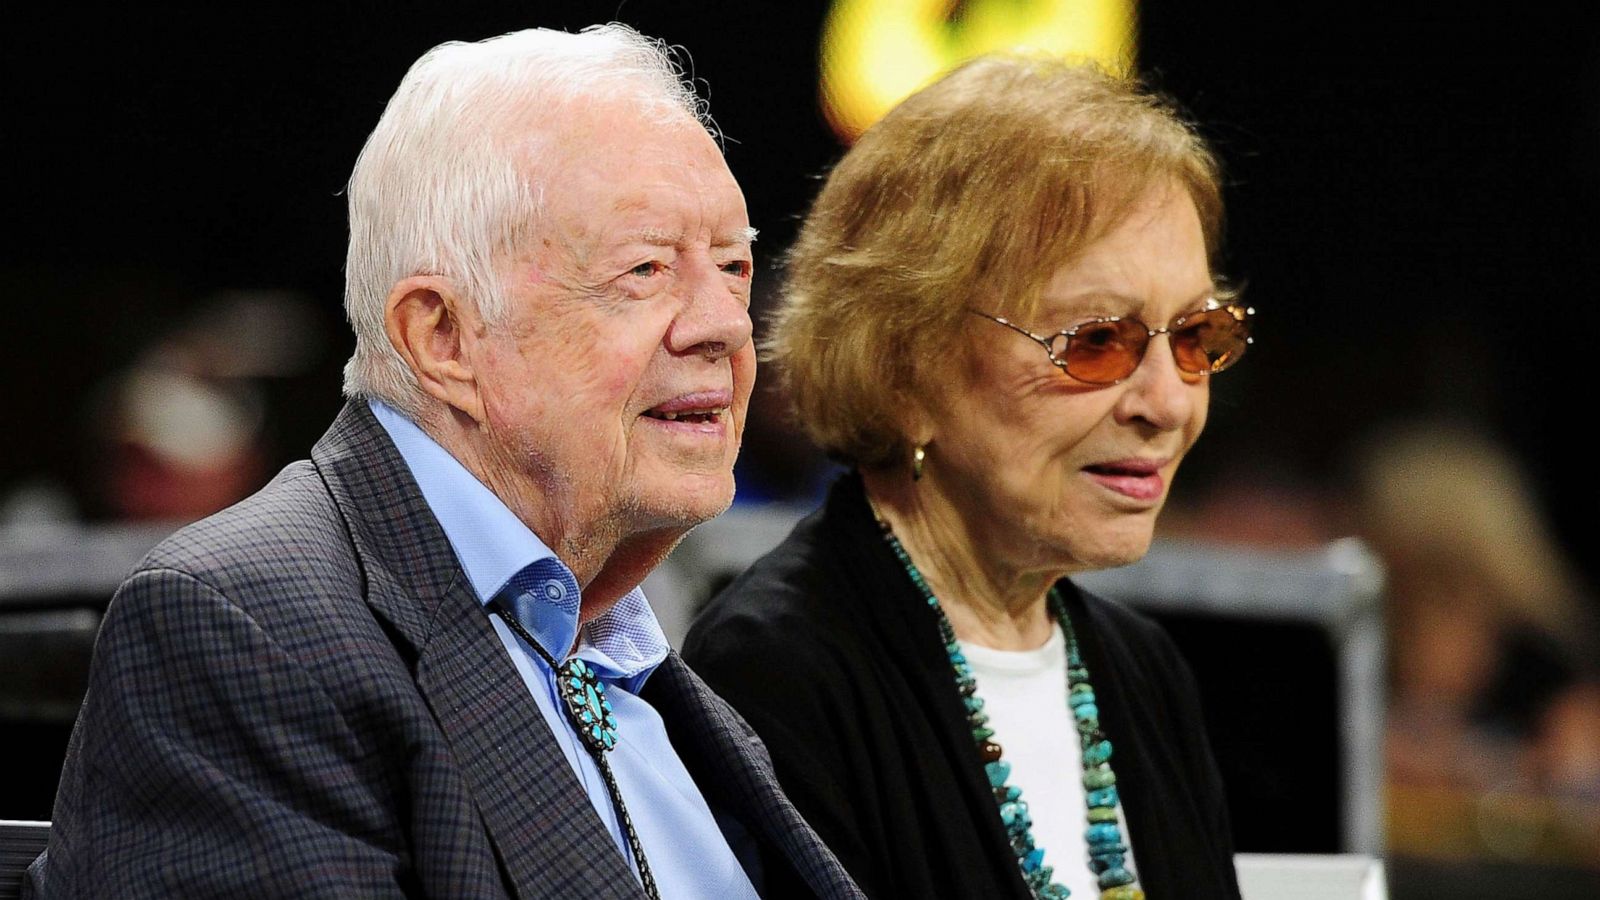 PHOTO: FILE - Former president Jimmy Carter and his wife Rosalynn prior to a game at Mercedes-Benz Stadium, Sept. 30, 2018 in Atlanta.